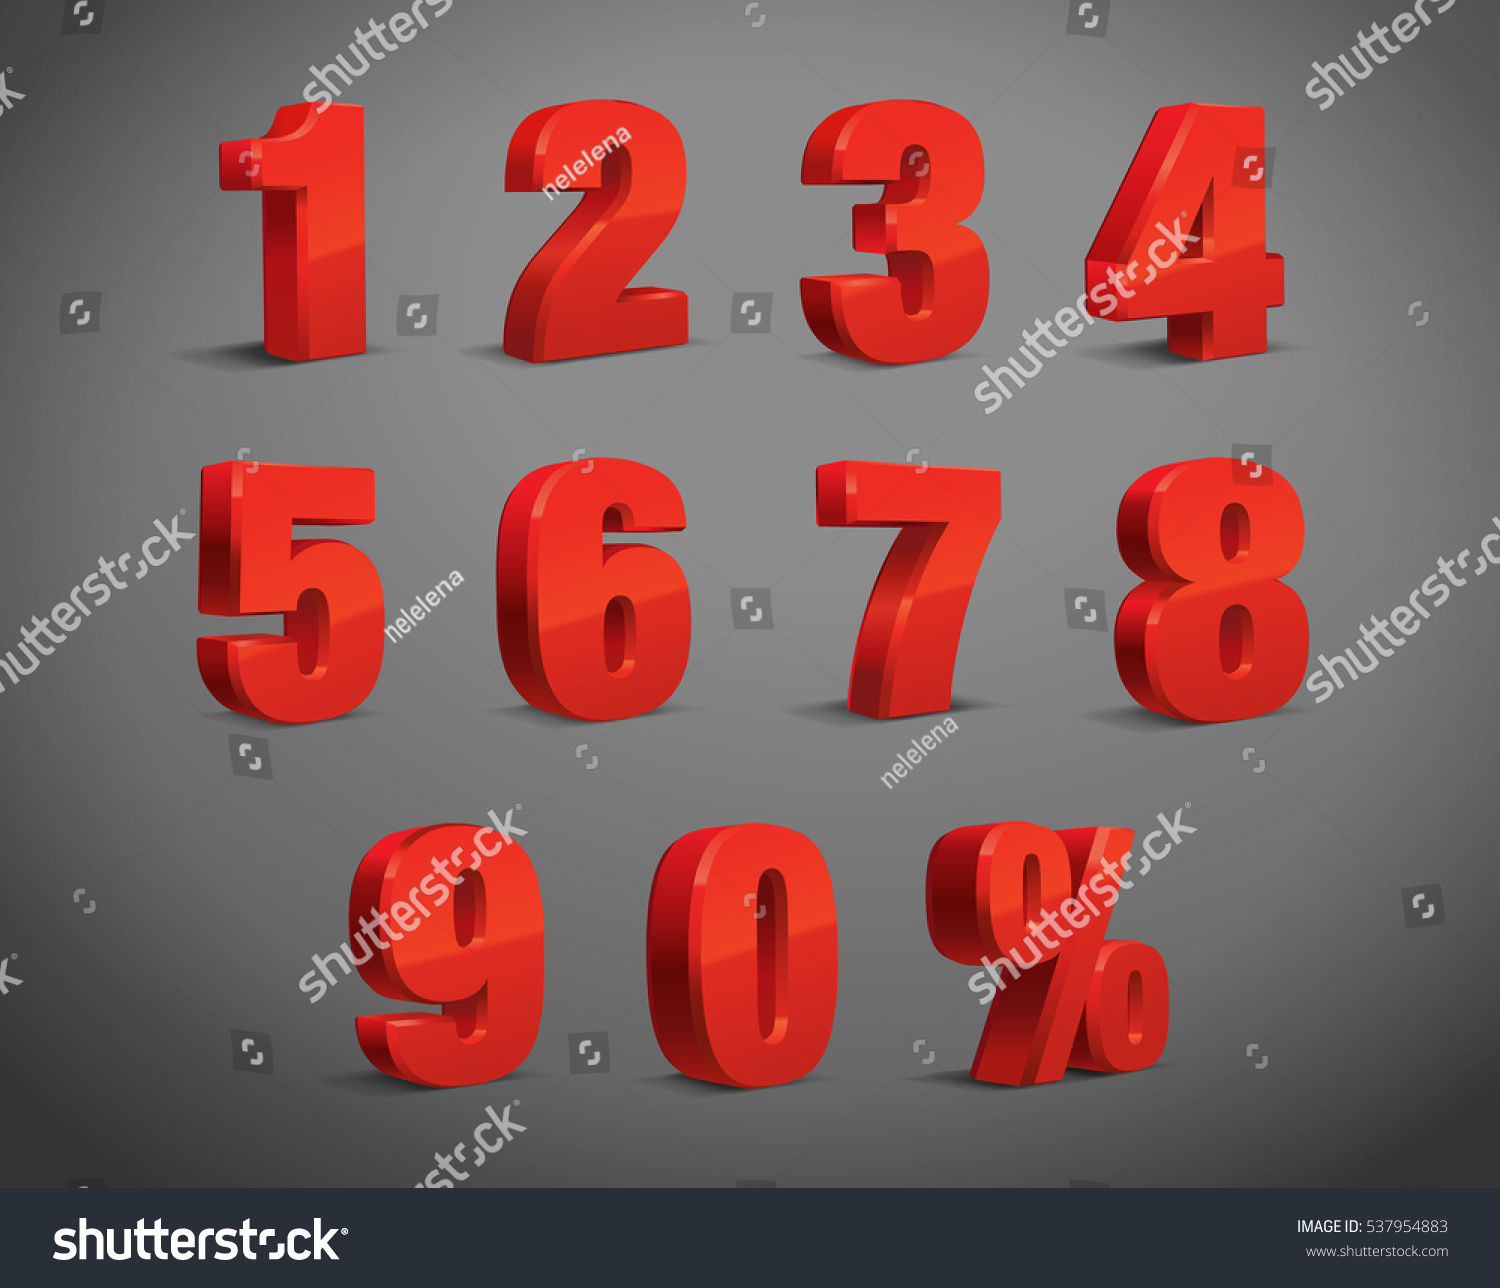 3D Red Metallic Letter. 0, 1, 2, 3, 4, 5, 6, 7, 8, 9 numeral alphabet. Vector Isolated Number. #537954883